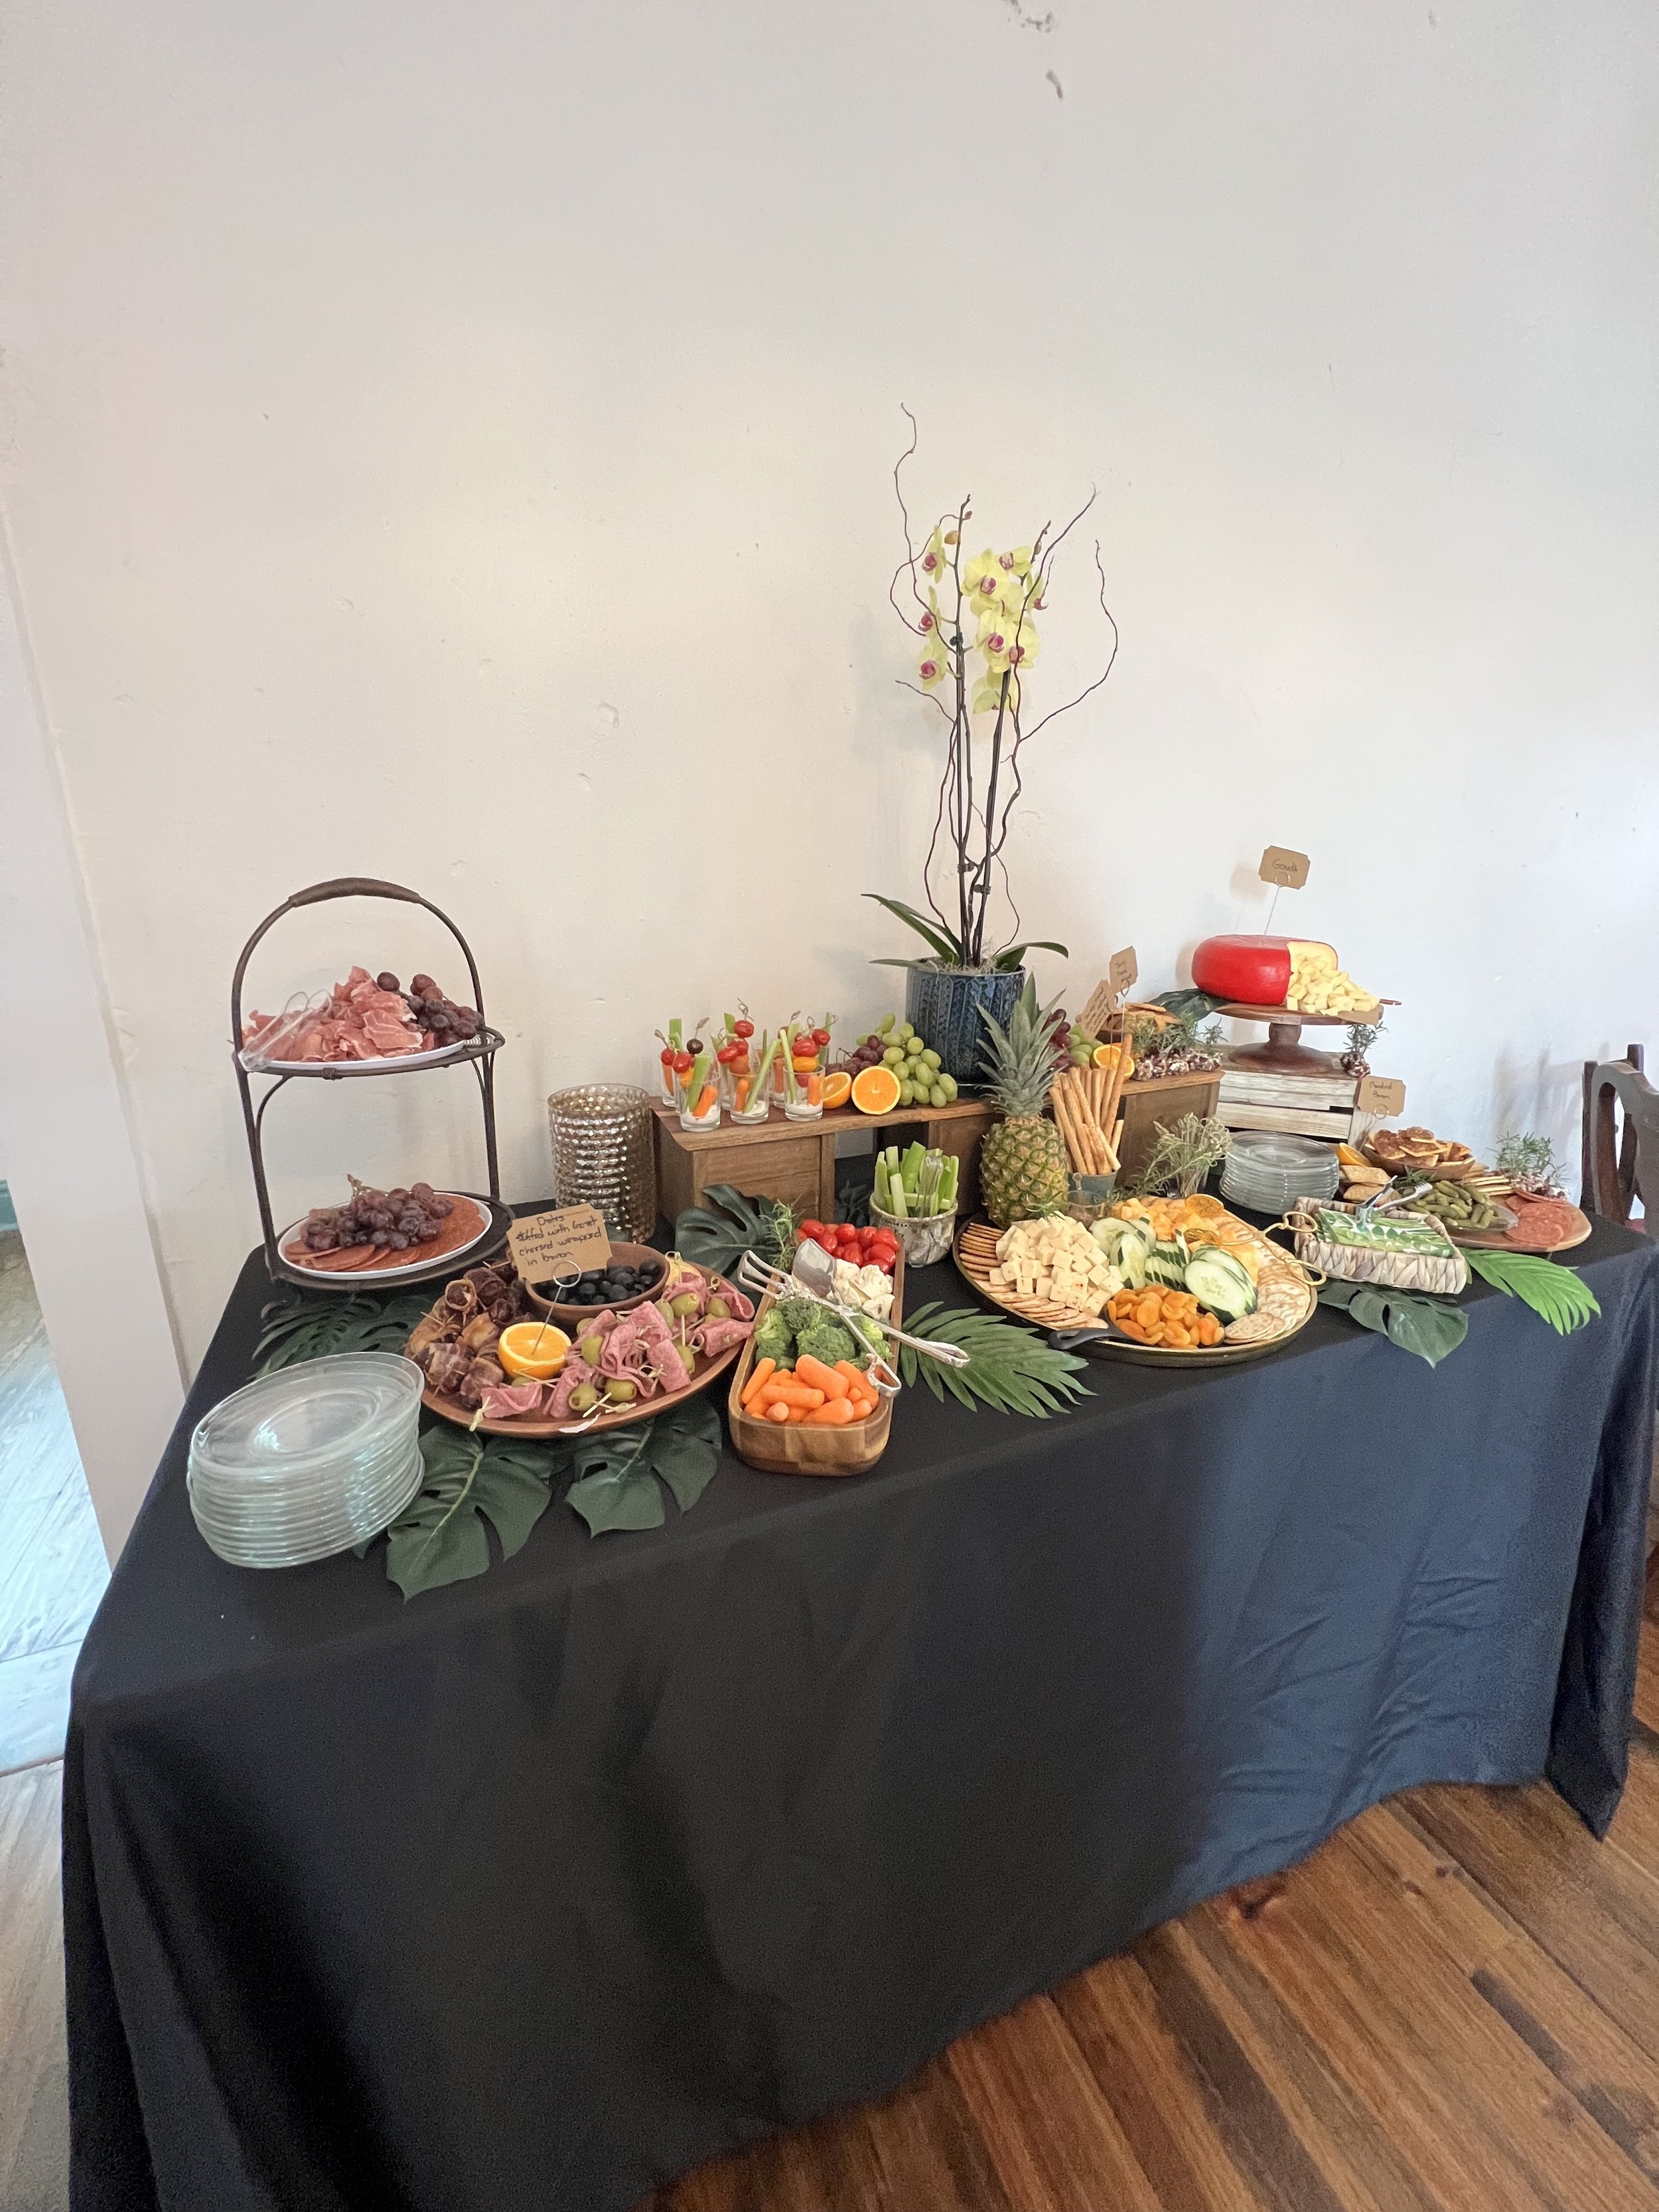 The Historic Dallas Jail Engagement Party Gaston County Event Venue charcuterie Display Catering .jpg